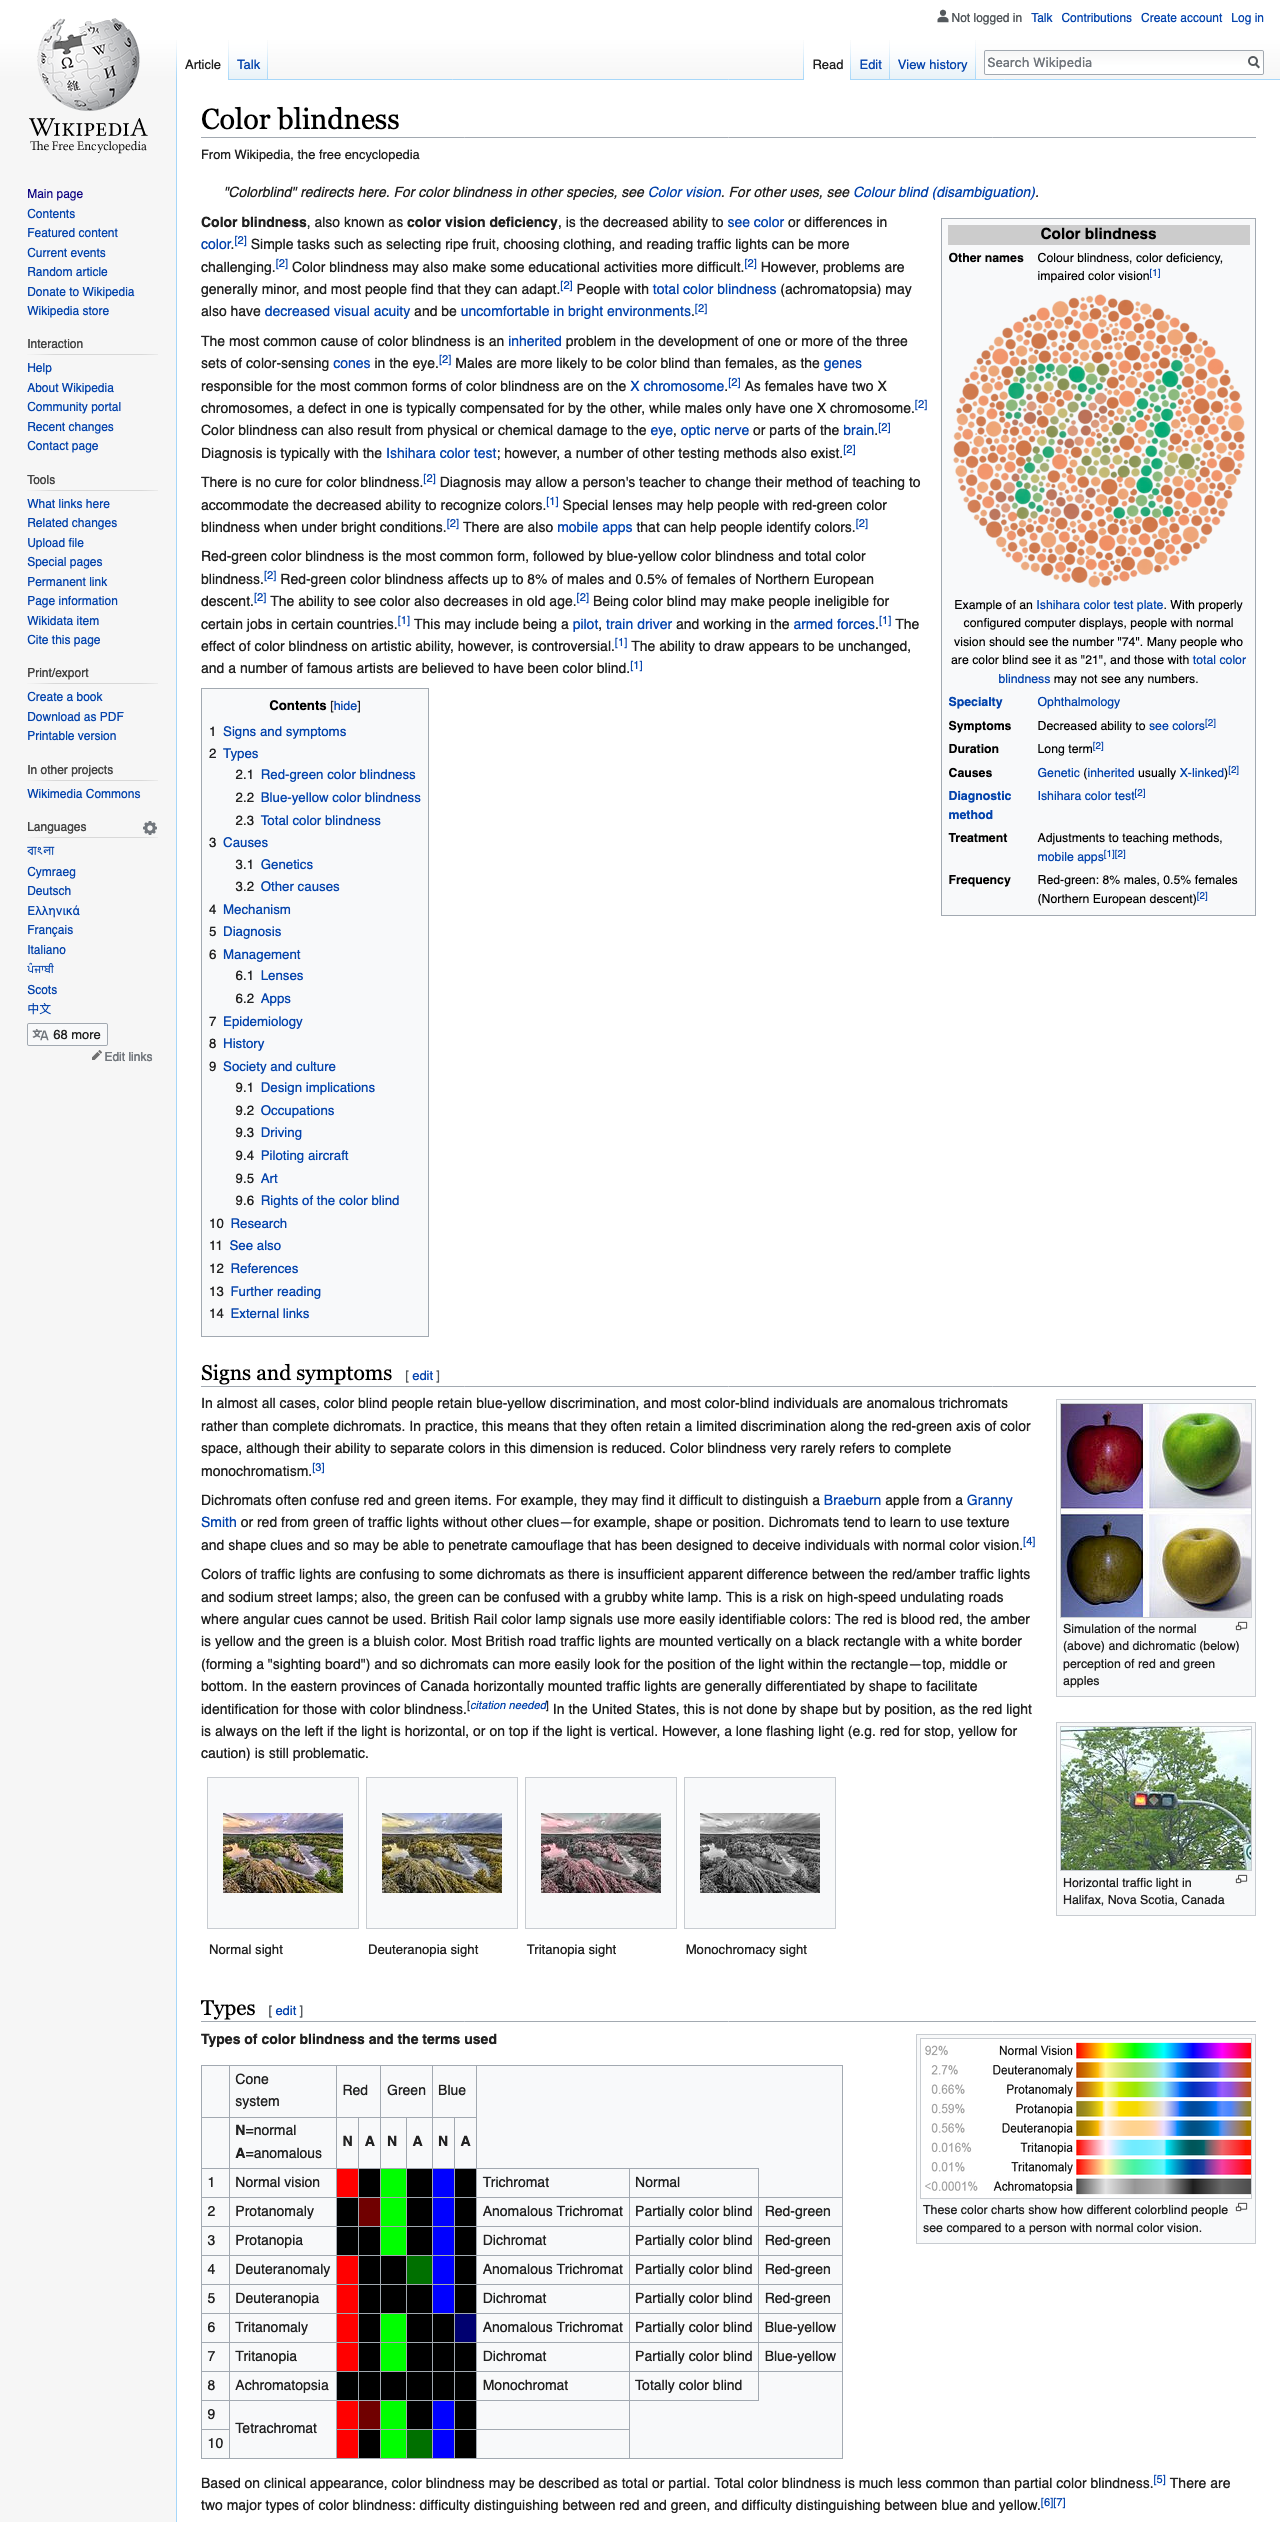 Overview of the Wikipedia article on colour perception deficit.